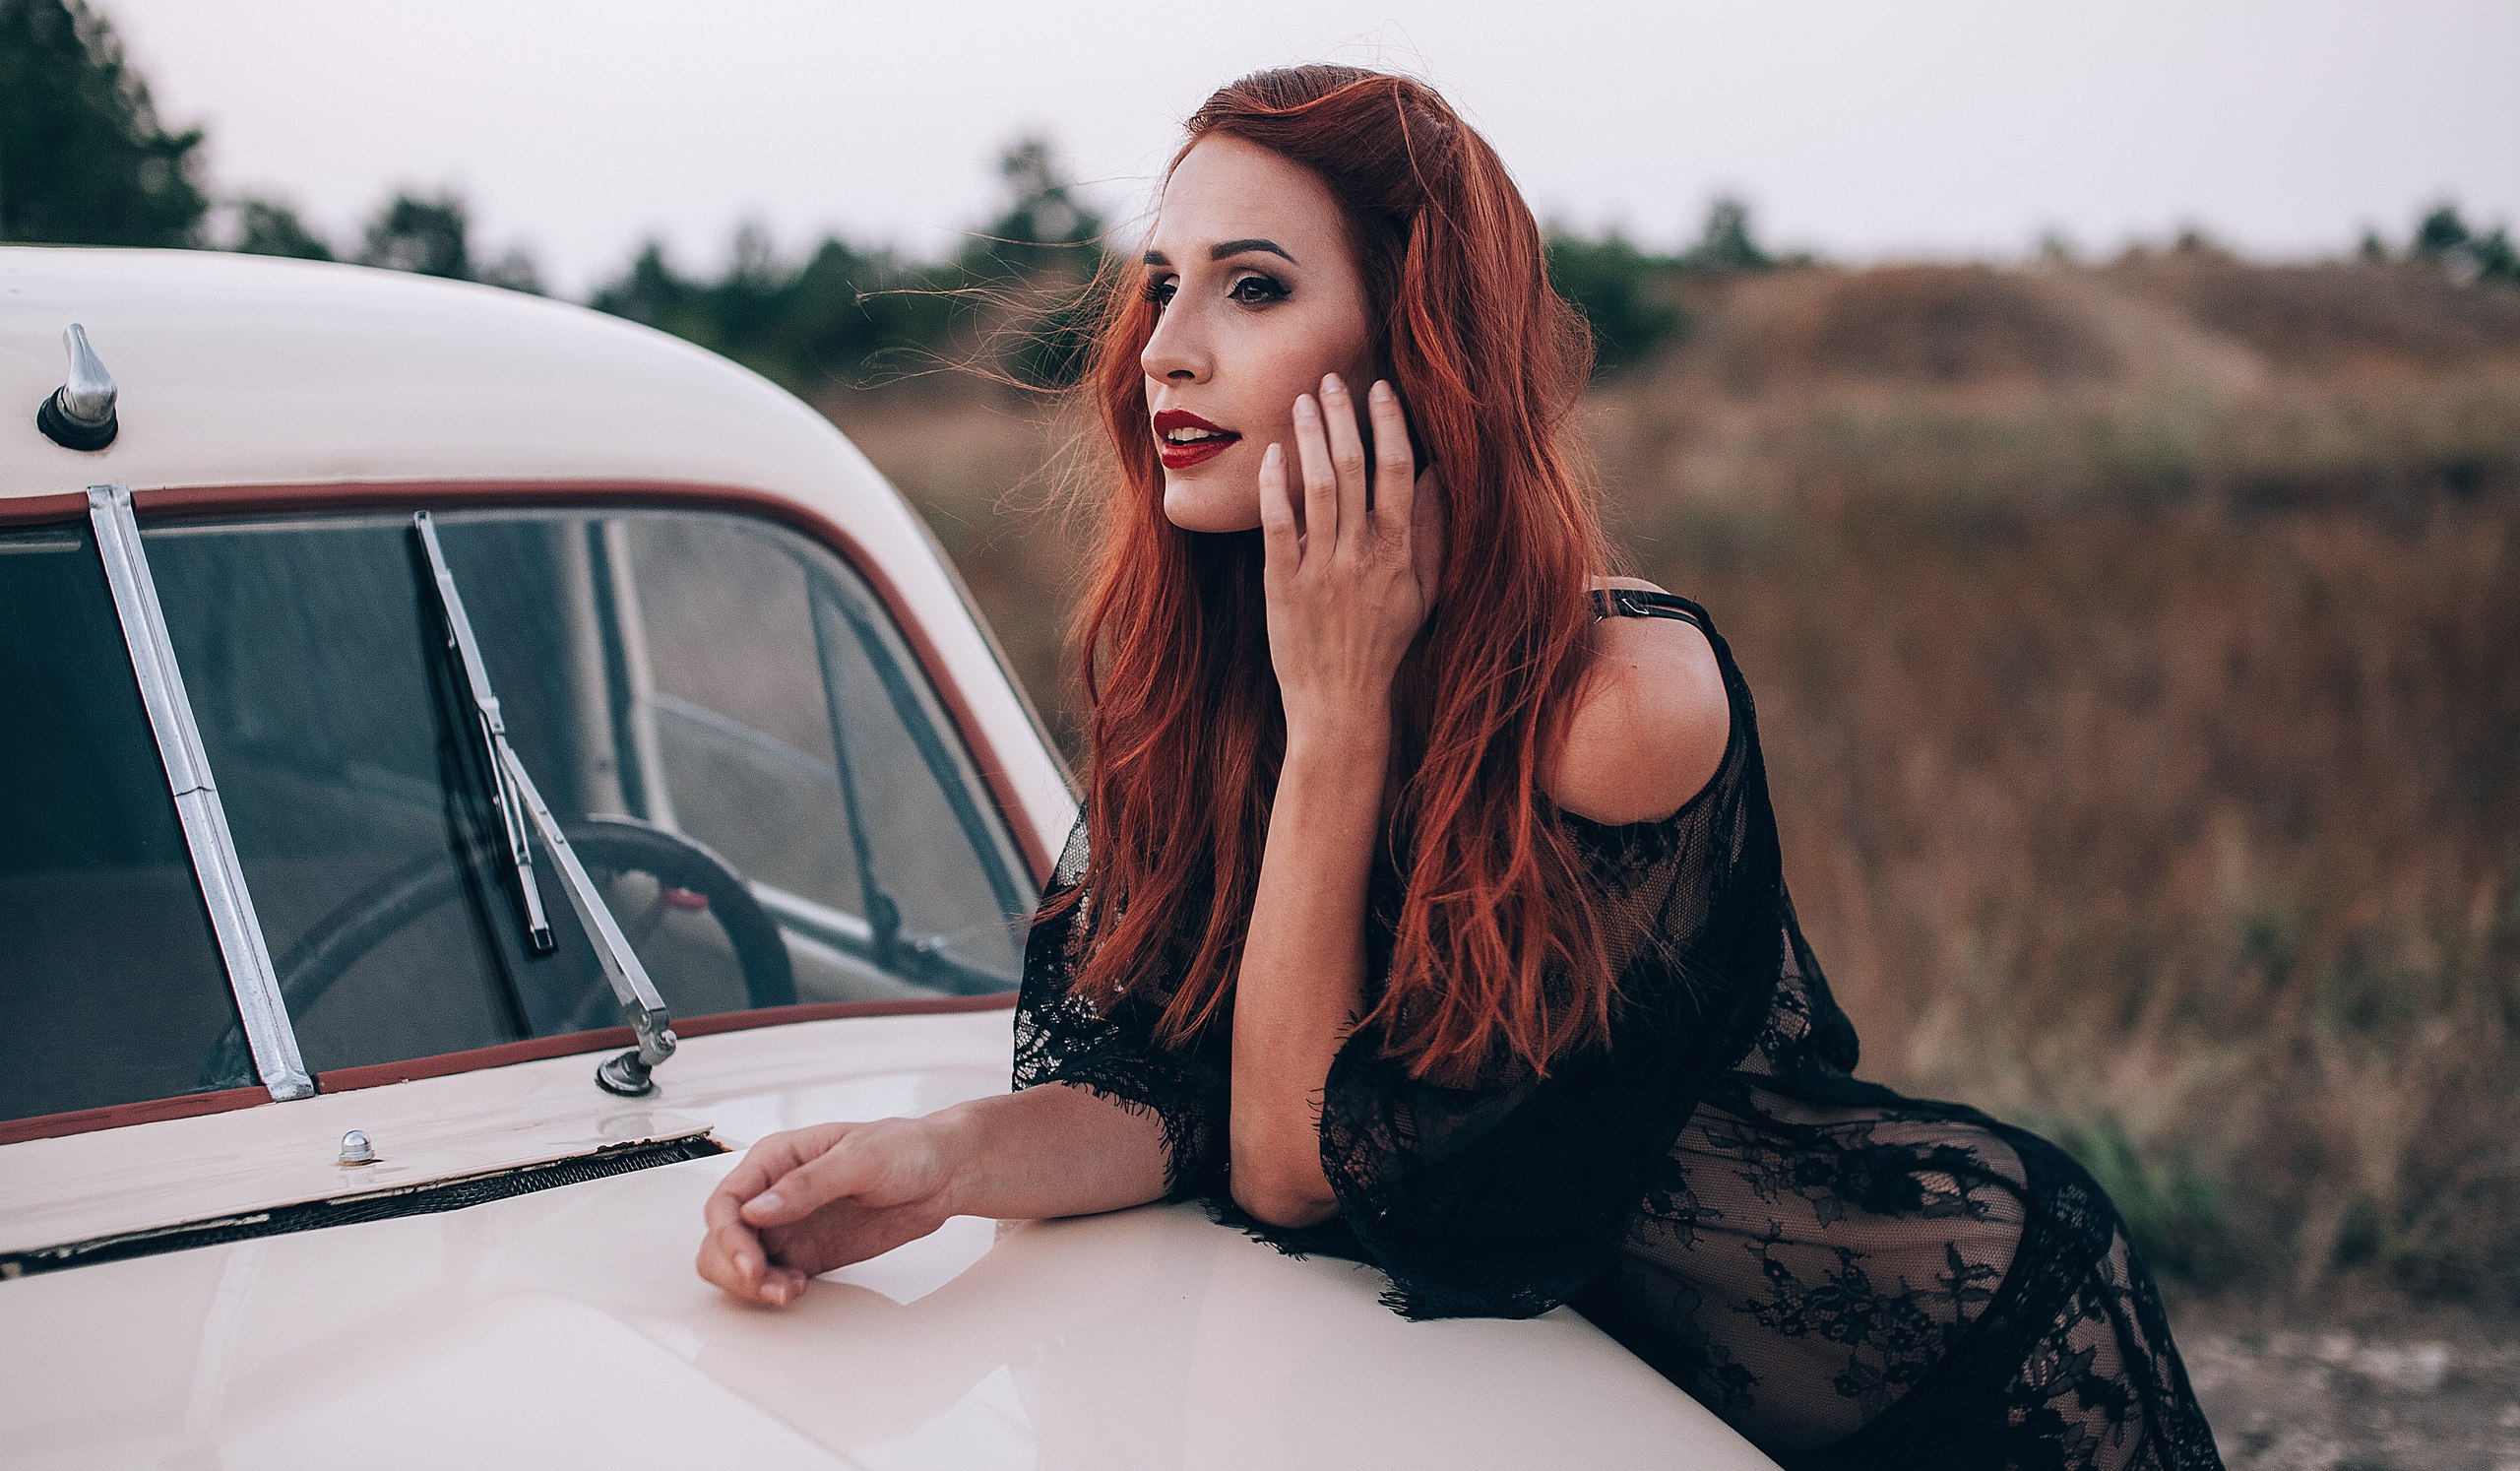 People 2560x1494 women model redhead red lipstick women with cars women outdoors lingerie black lingerie see-through clothing looking into the distance depth of field portrait car old car GAZ